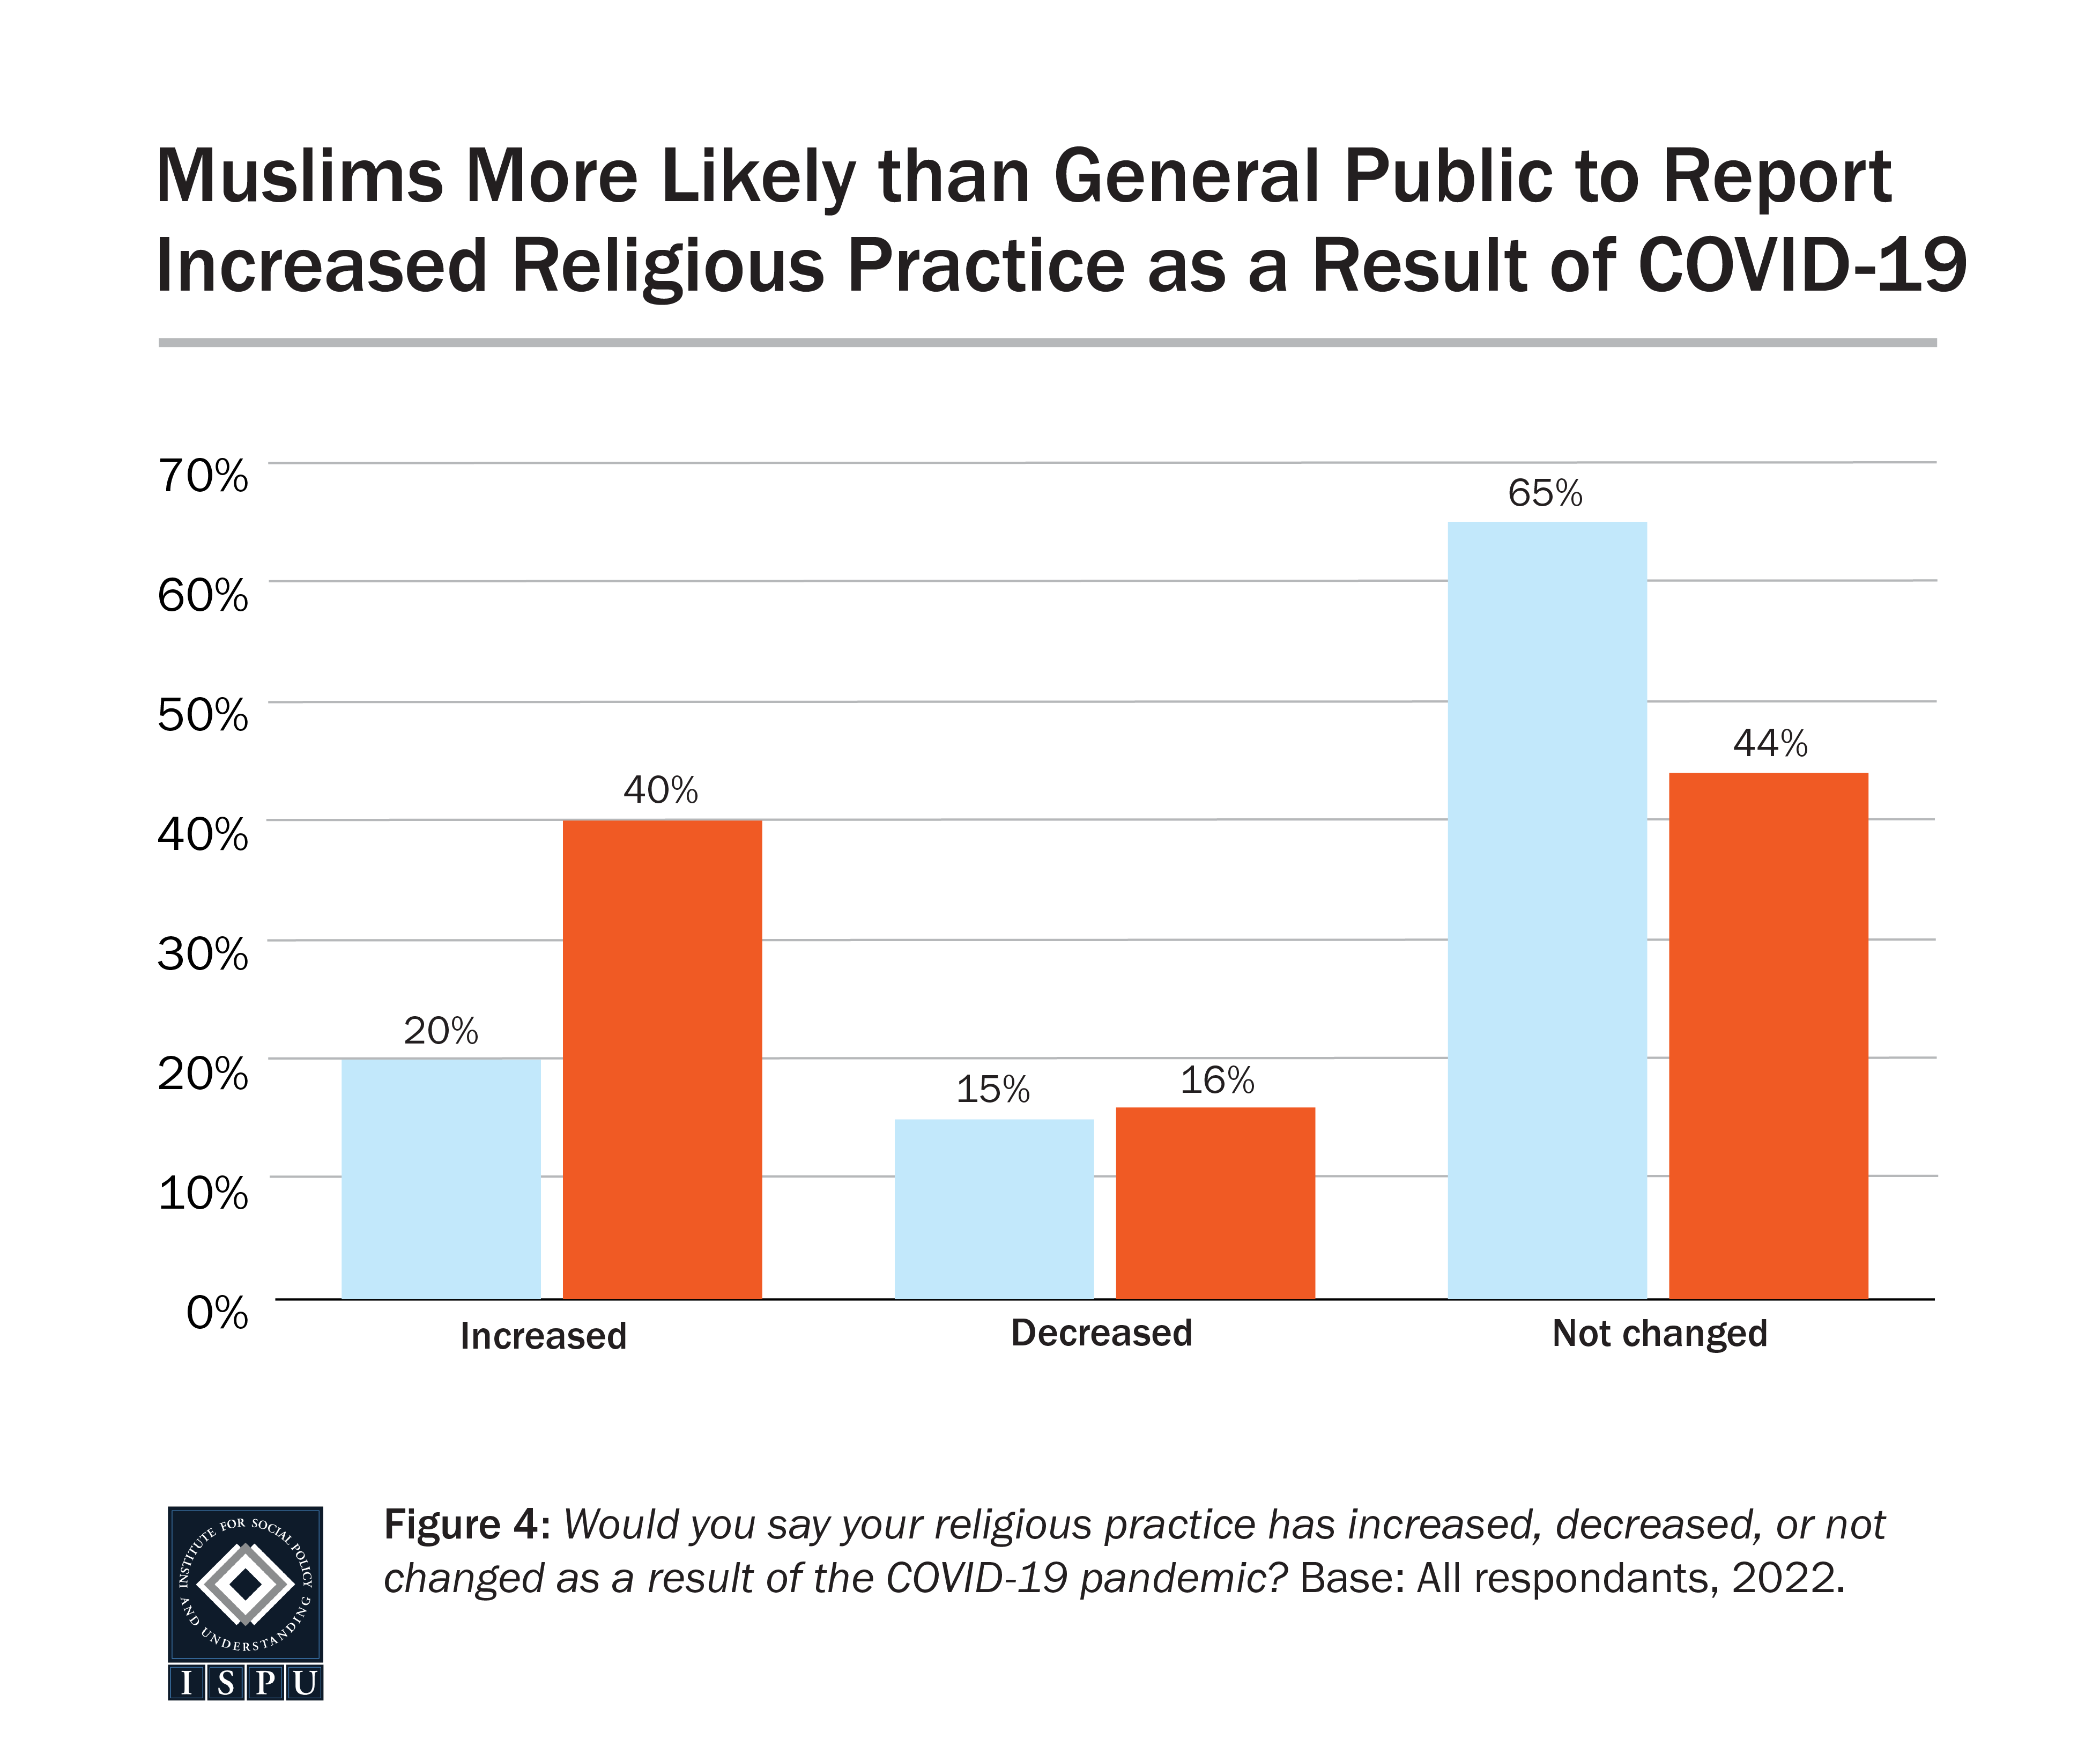 Graph displaying: bar chart showing Muslims more likely than general public to report increase in religious practice as a result of COVID-19.